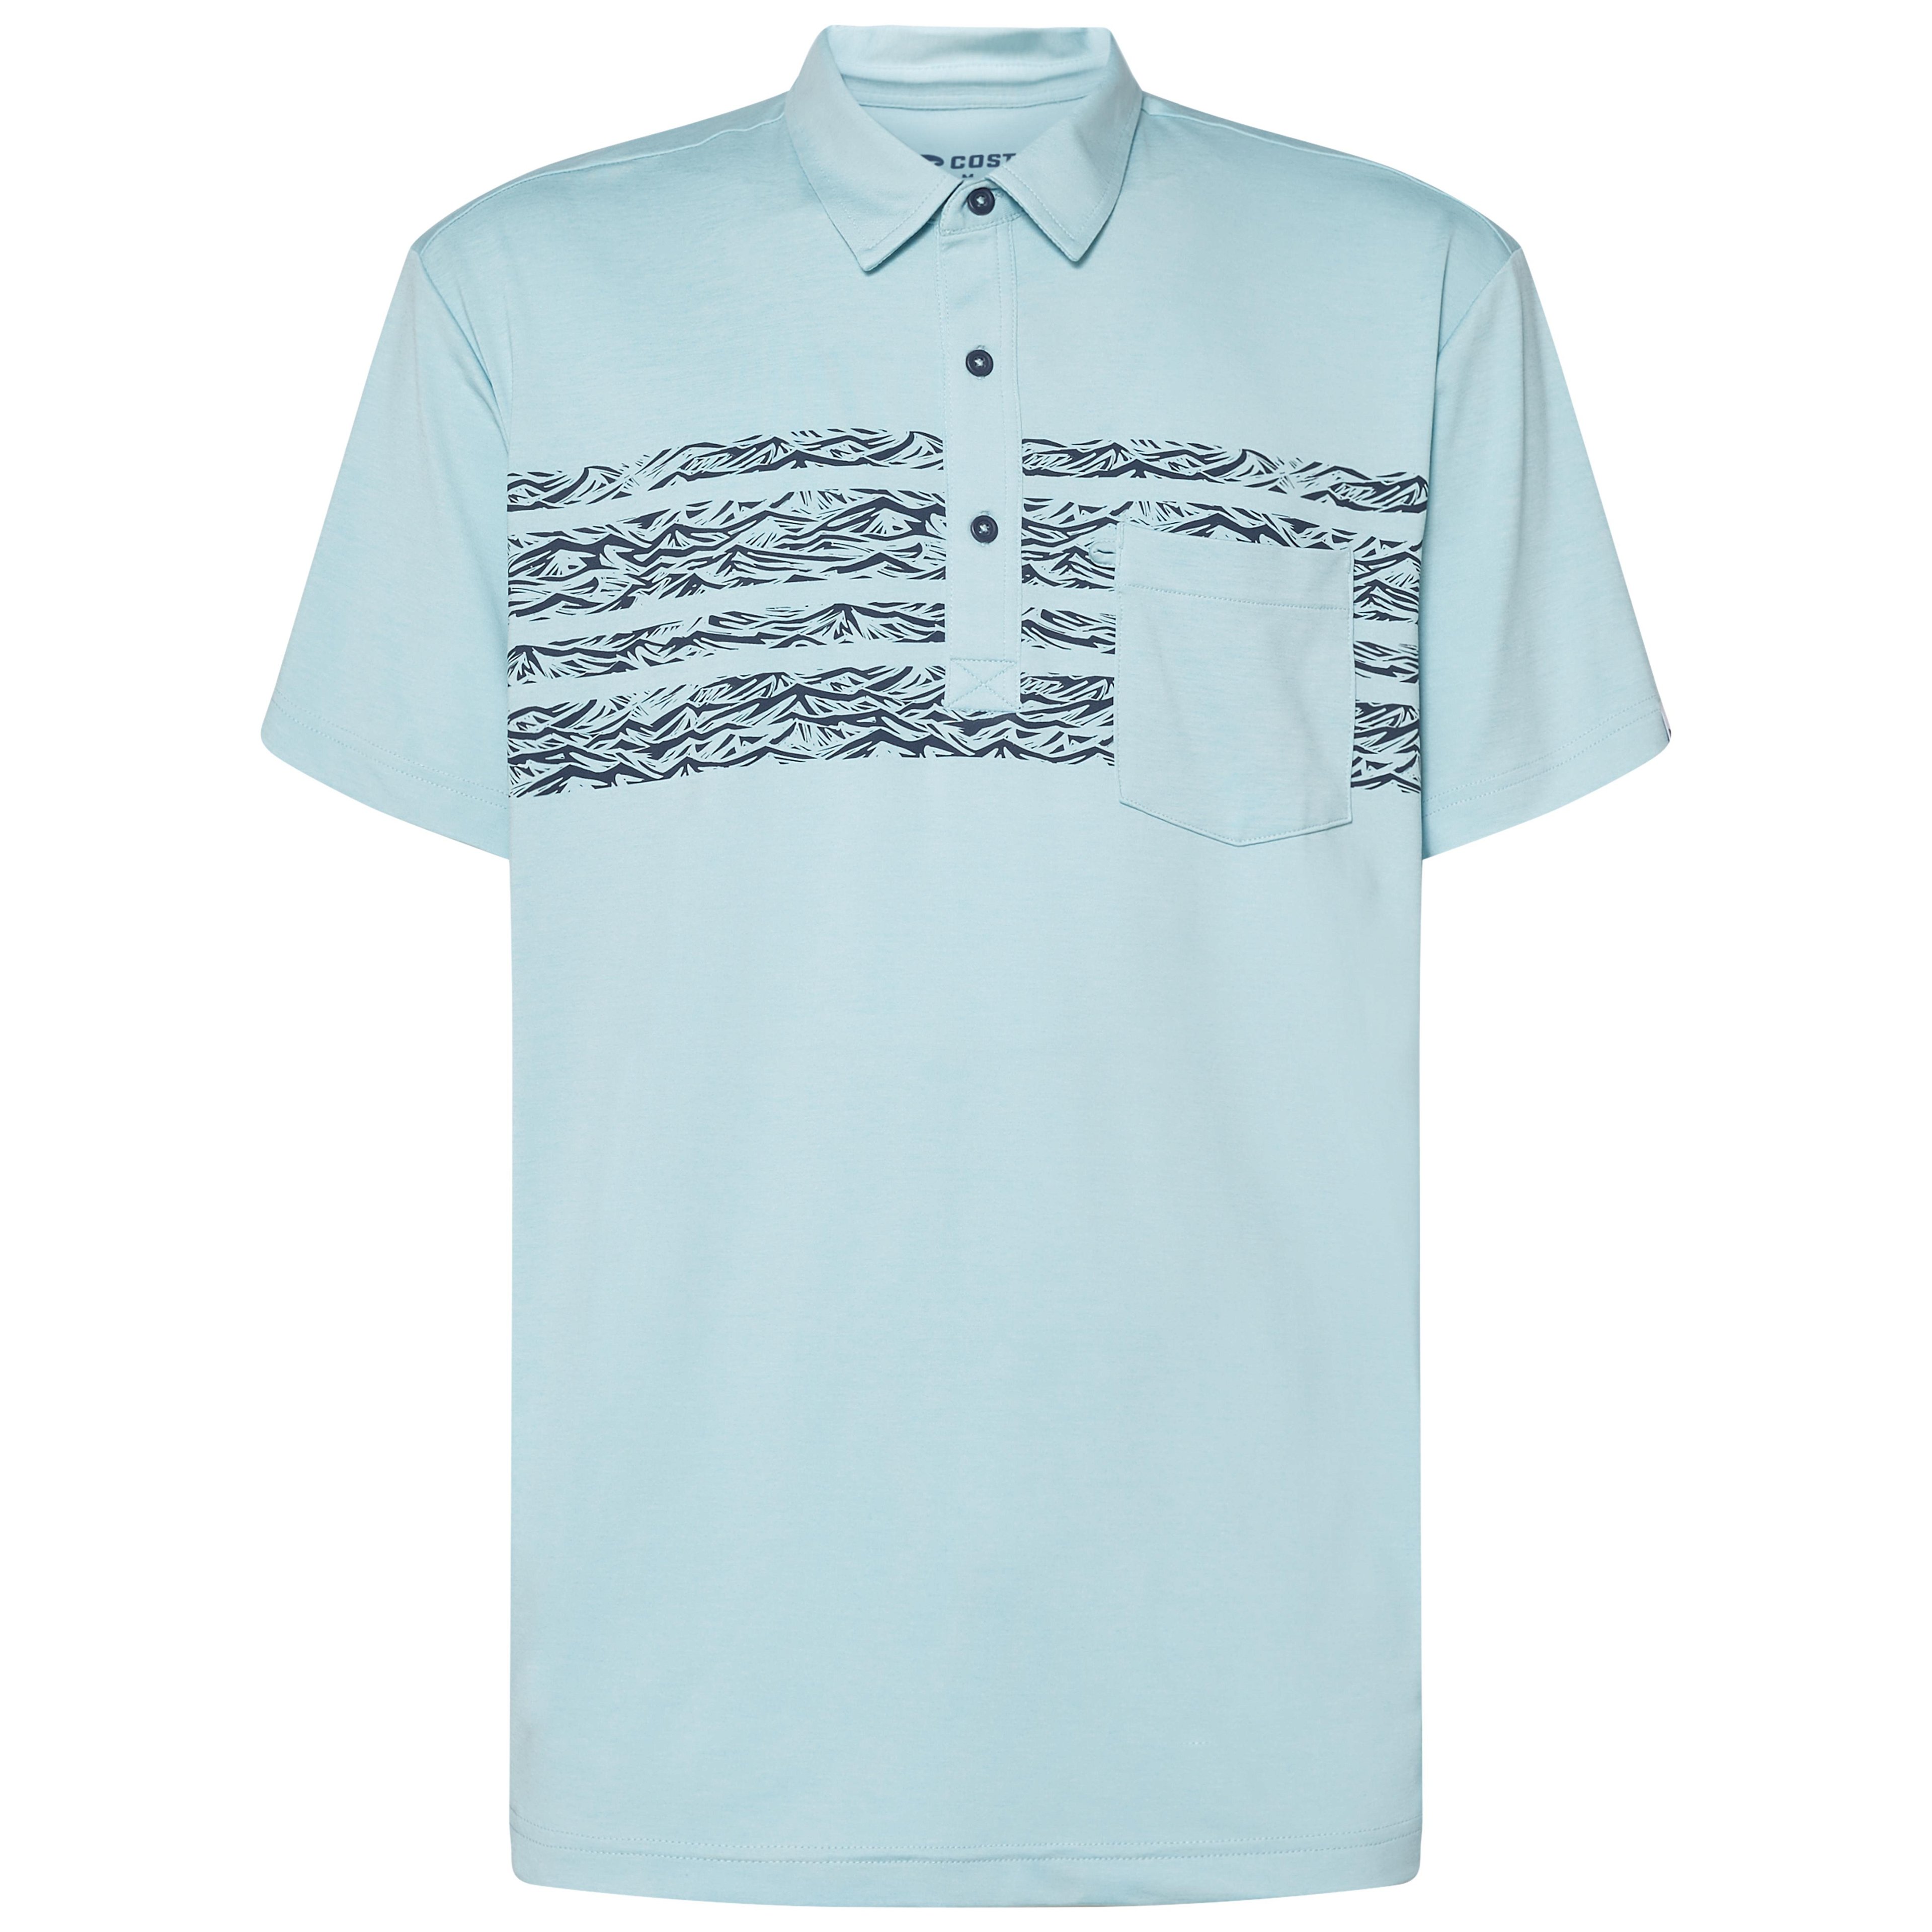 Voyager Printed Polo by COSTA